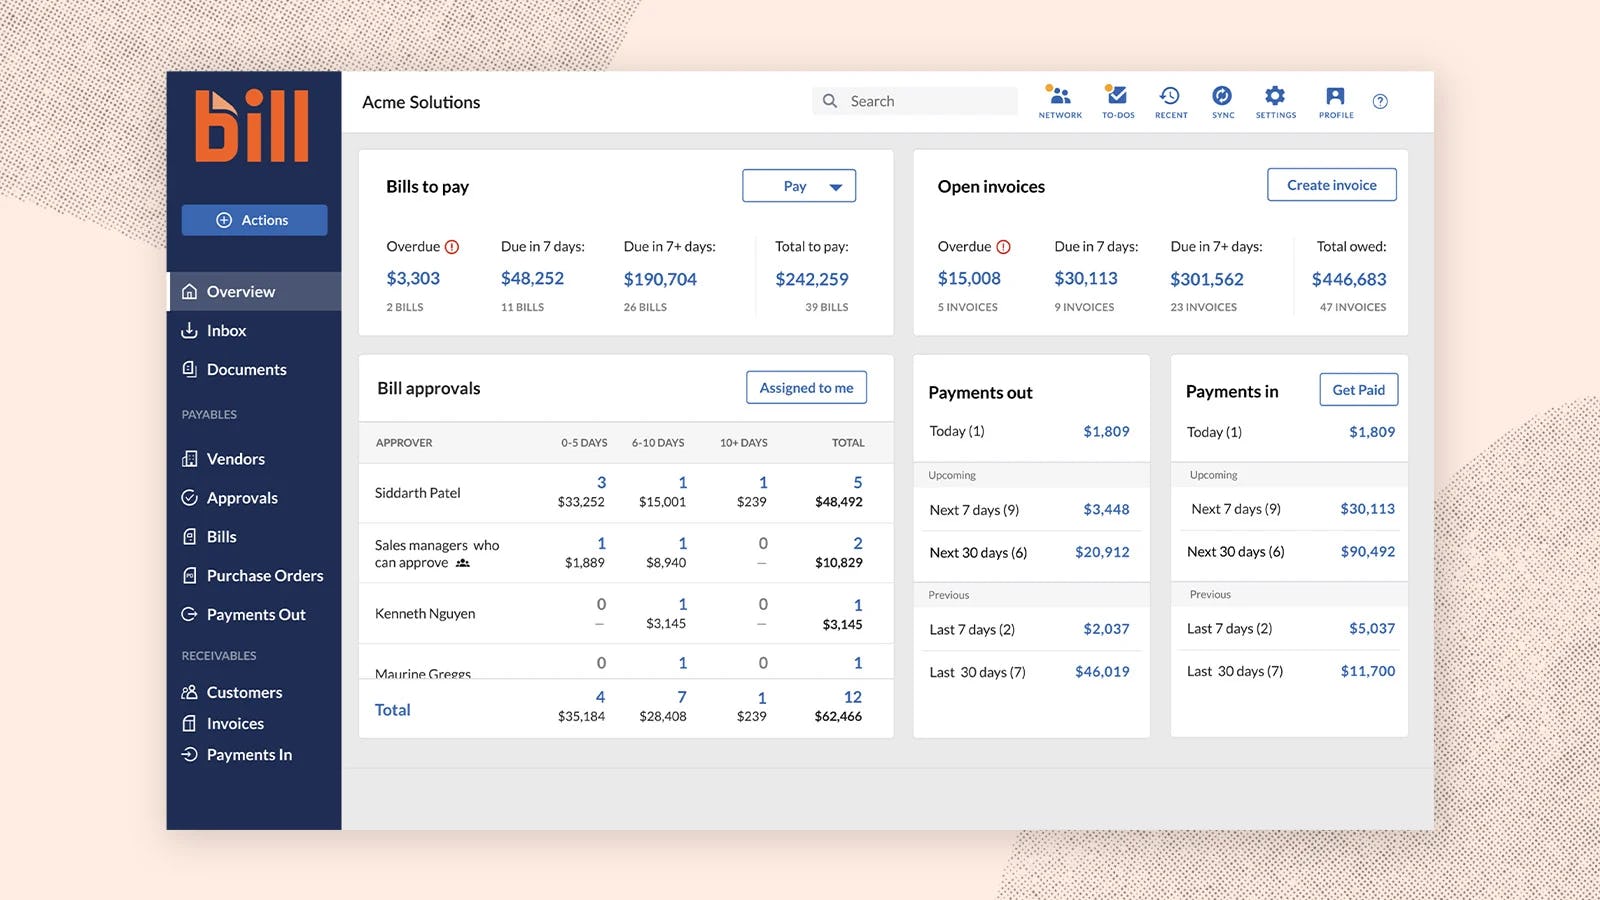 Bill.com Software - BILL’s central dashboard makes it easy to see your upcoming bills, invoices, and ingoing and outgoing payments.